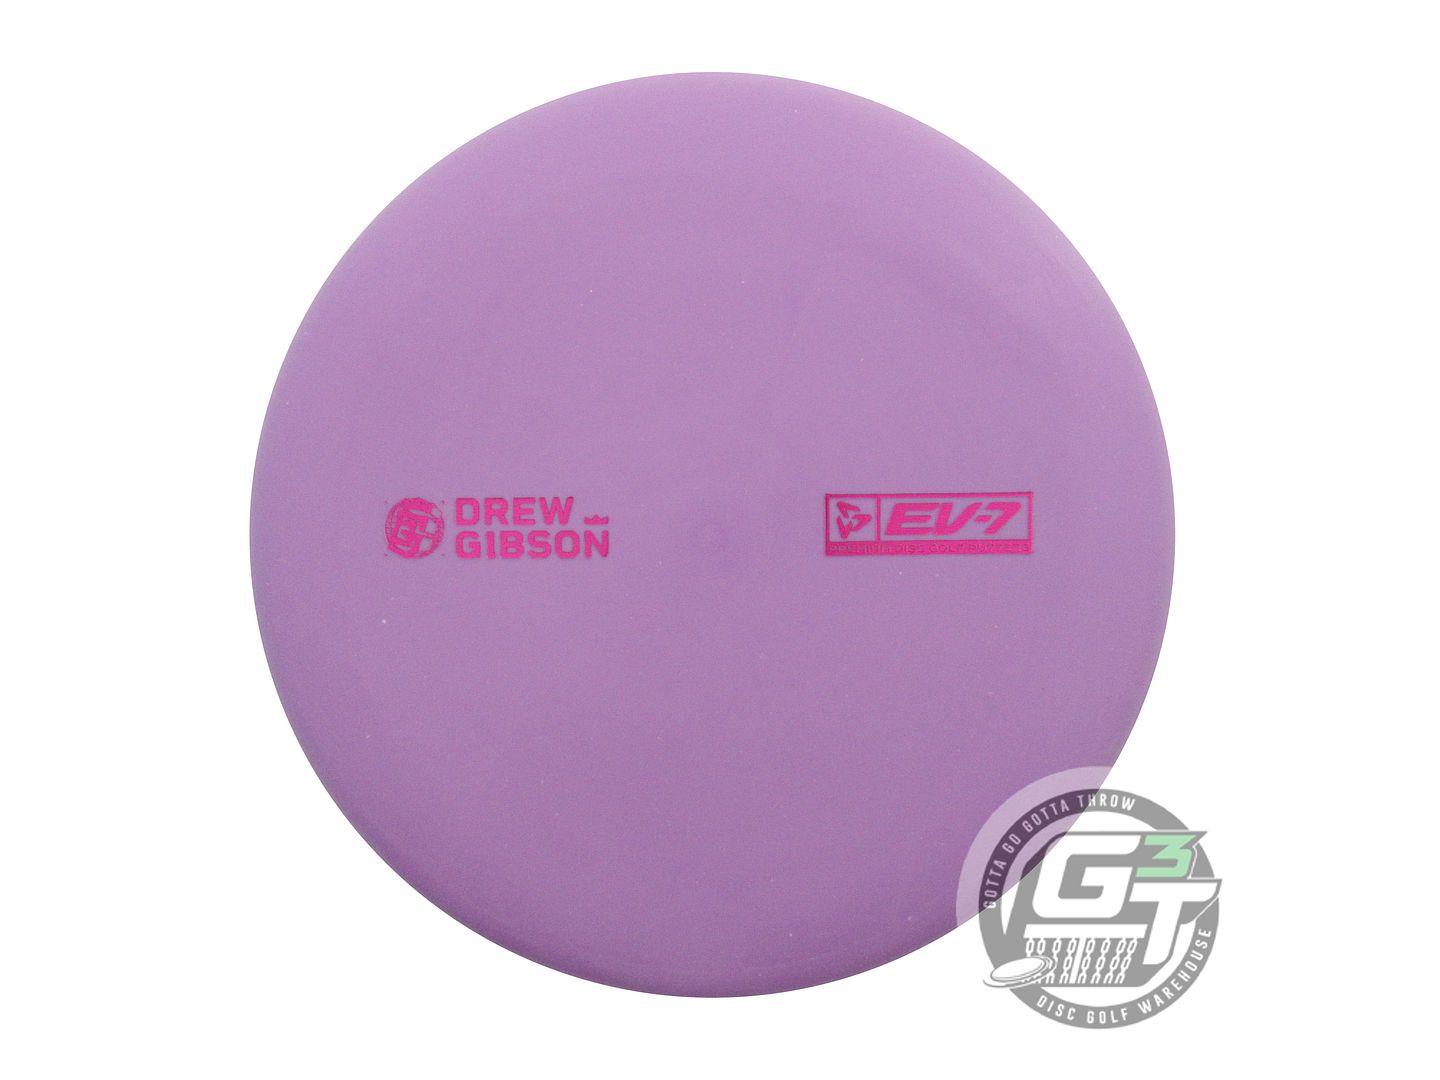 EV-7 Limited Edition 2022 Tour Series Drew Gibson OG Firm Penrose Putter Golf Disc (Individually Listed)